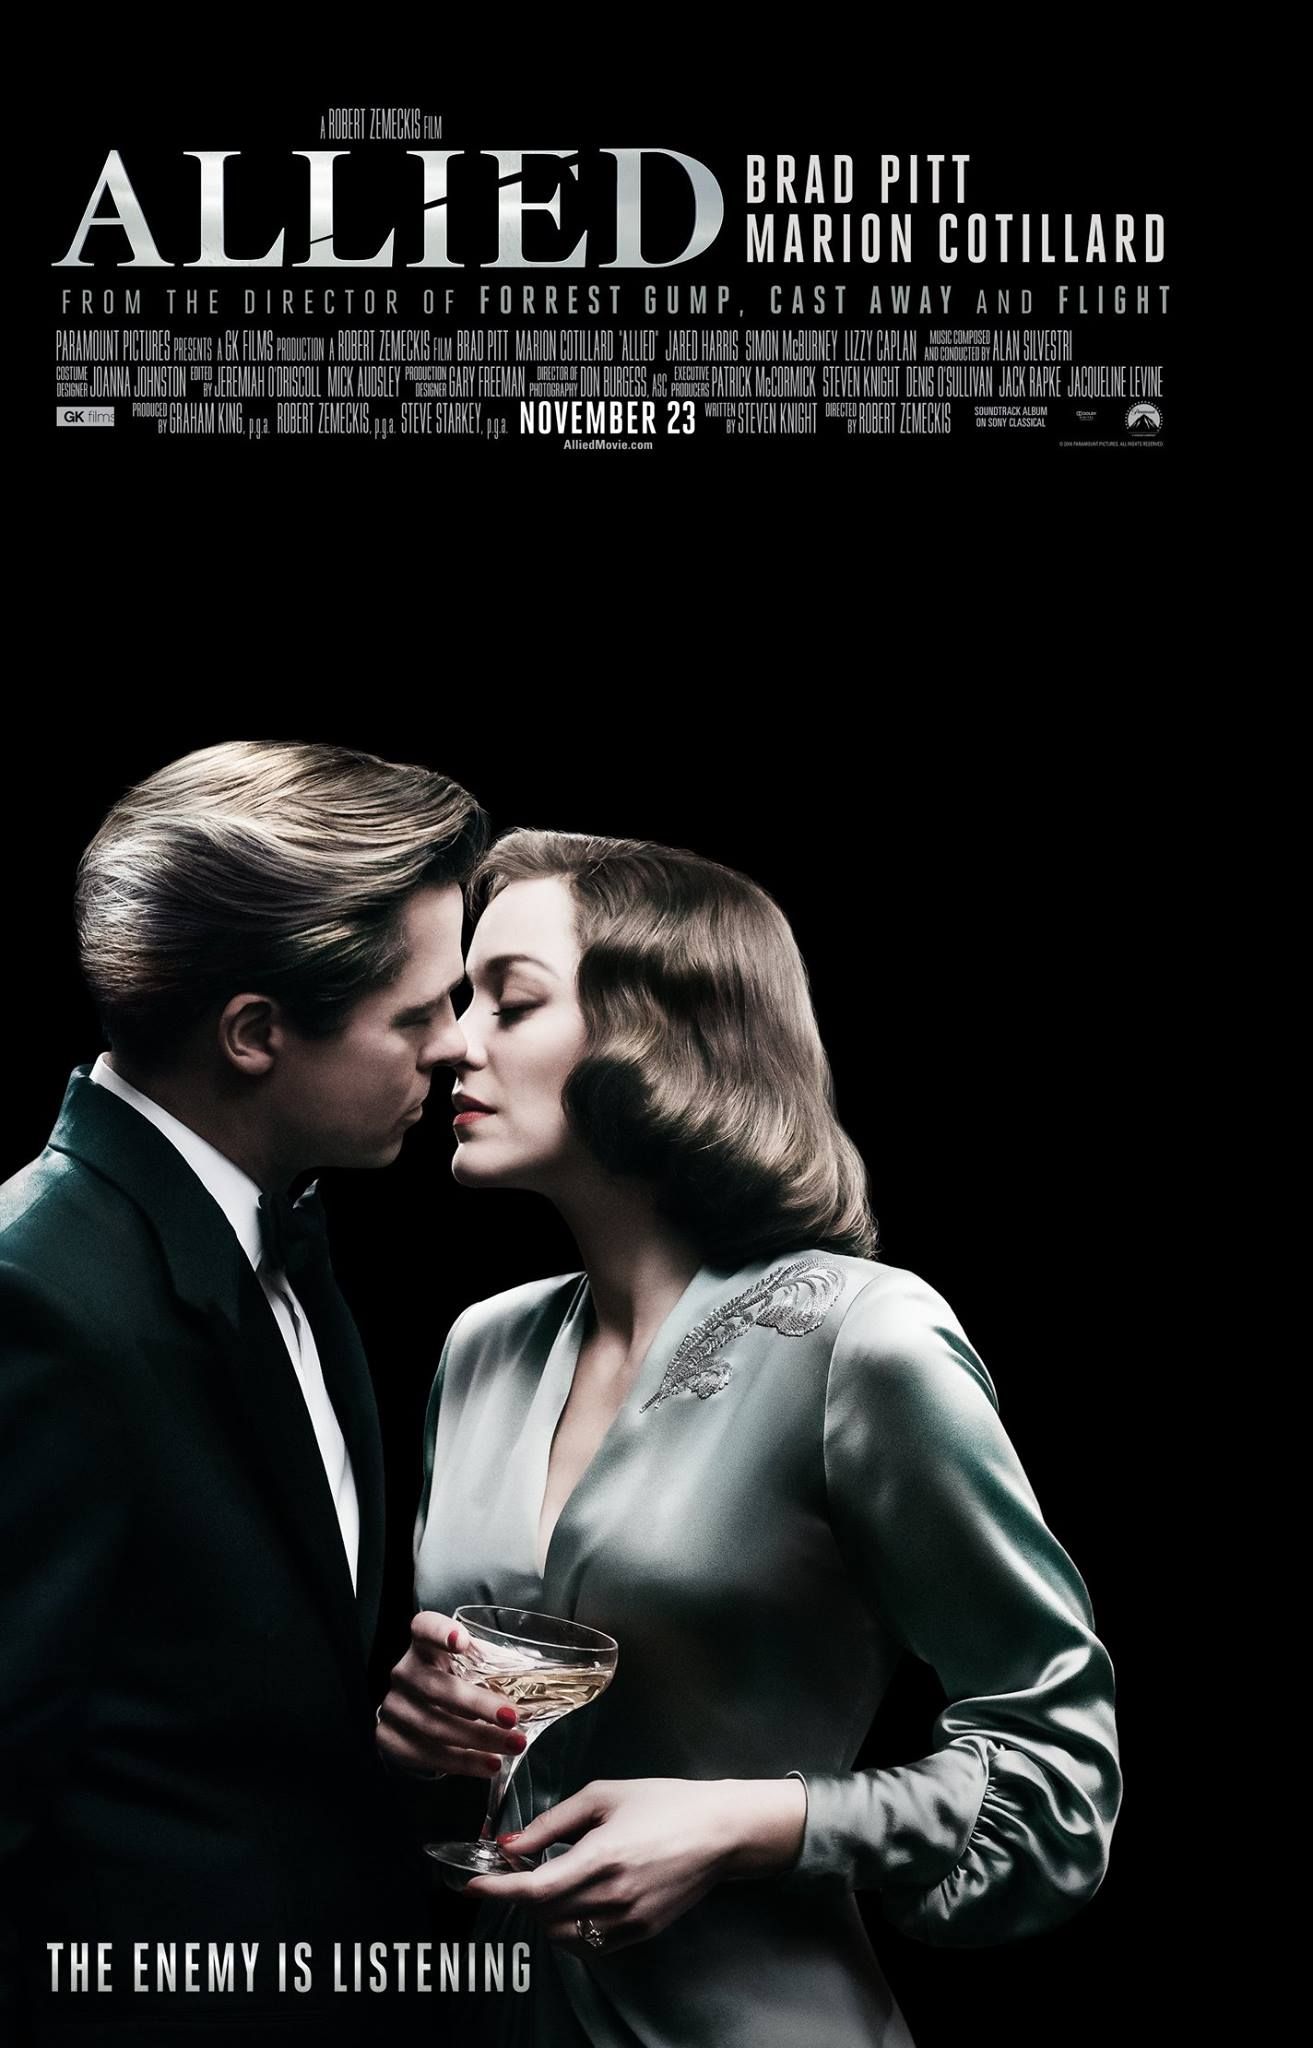 New poster for Allied starring Brad Pitt and Marion Cotillard